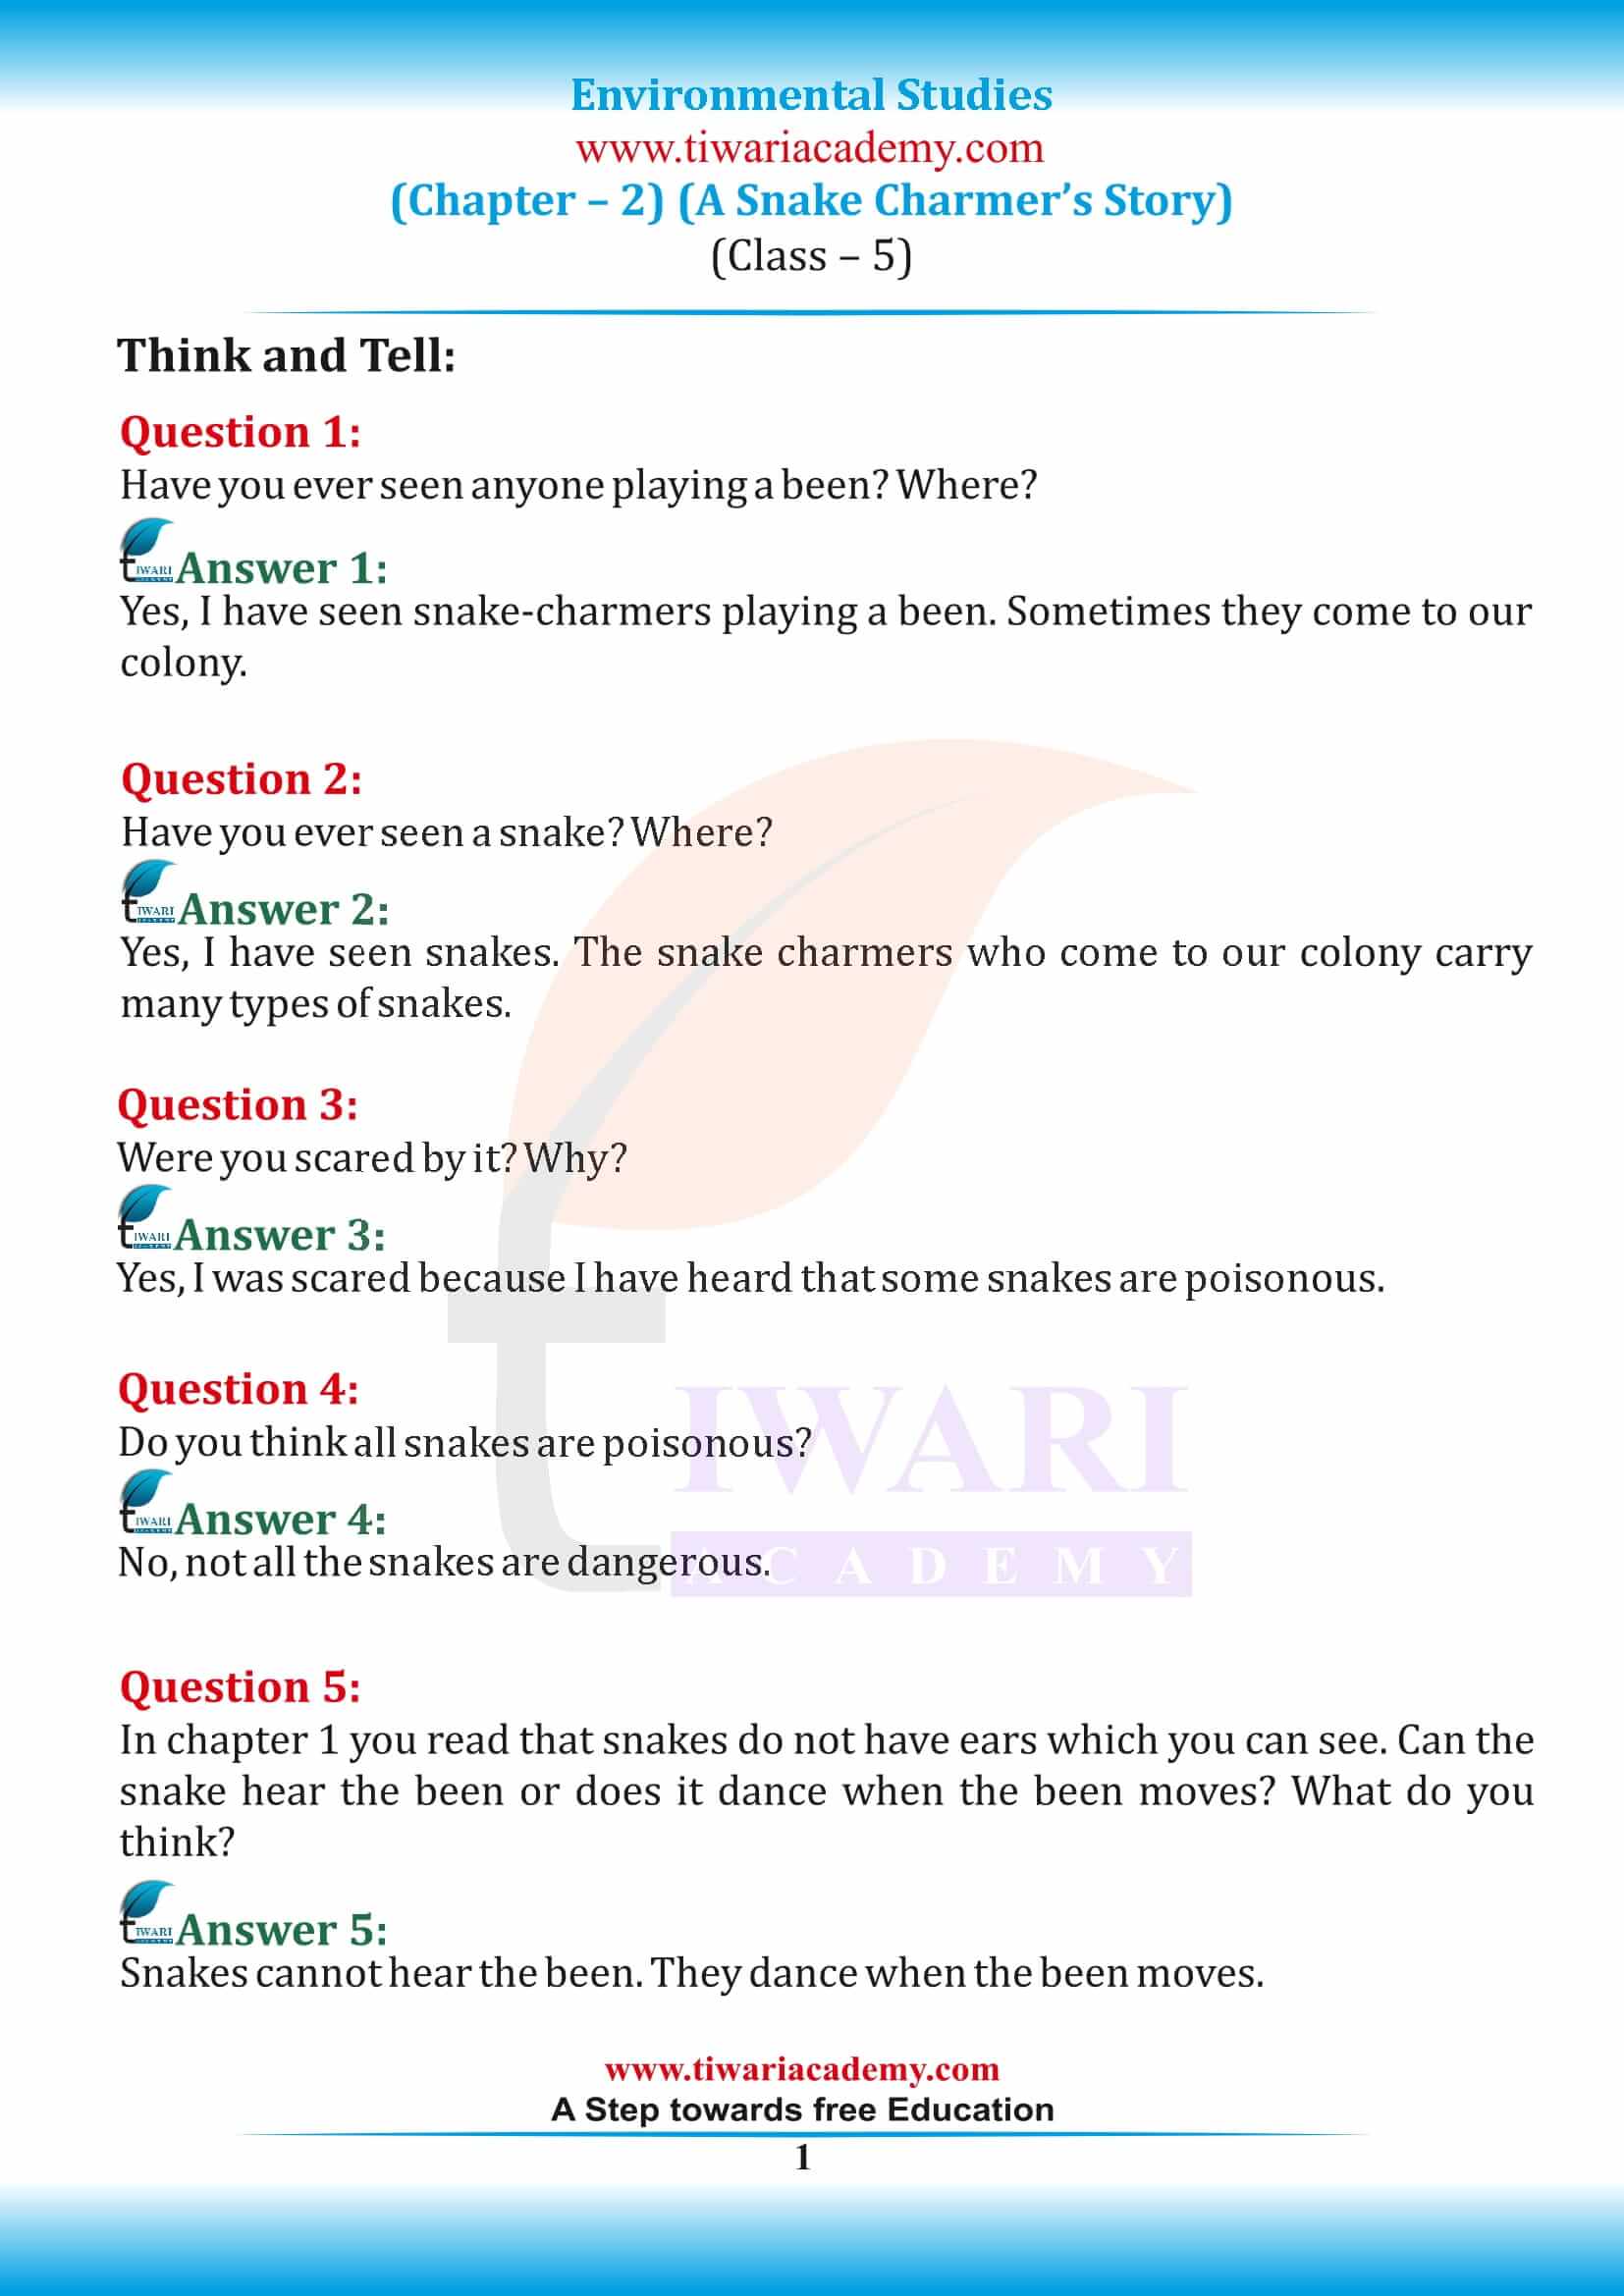 NCERT Solutions for Class 5 EVS Chapter 2 A Snake Charmer’s Story